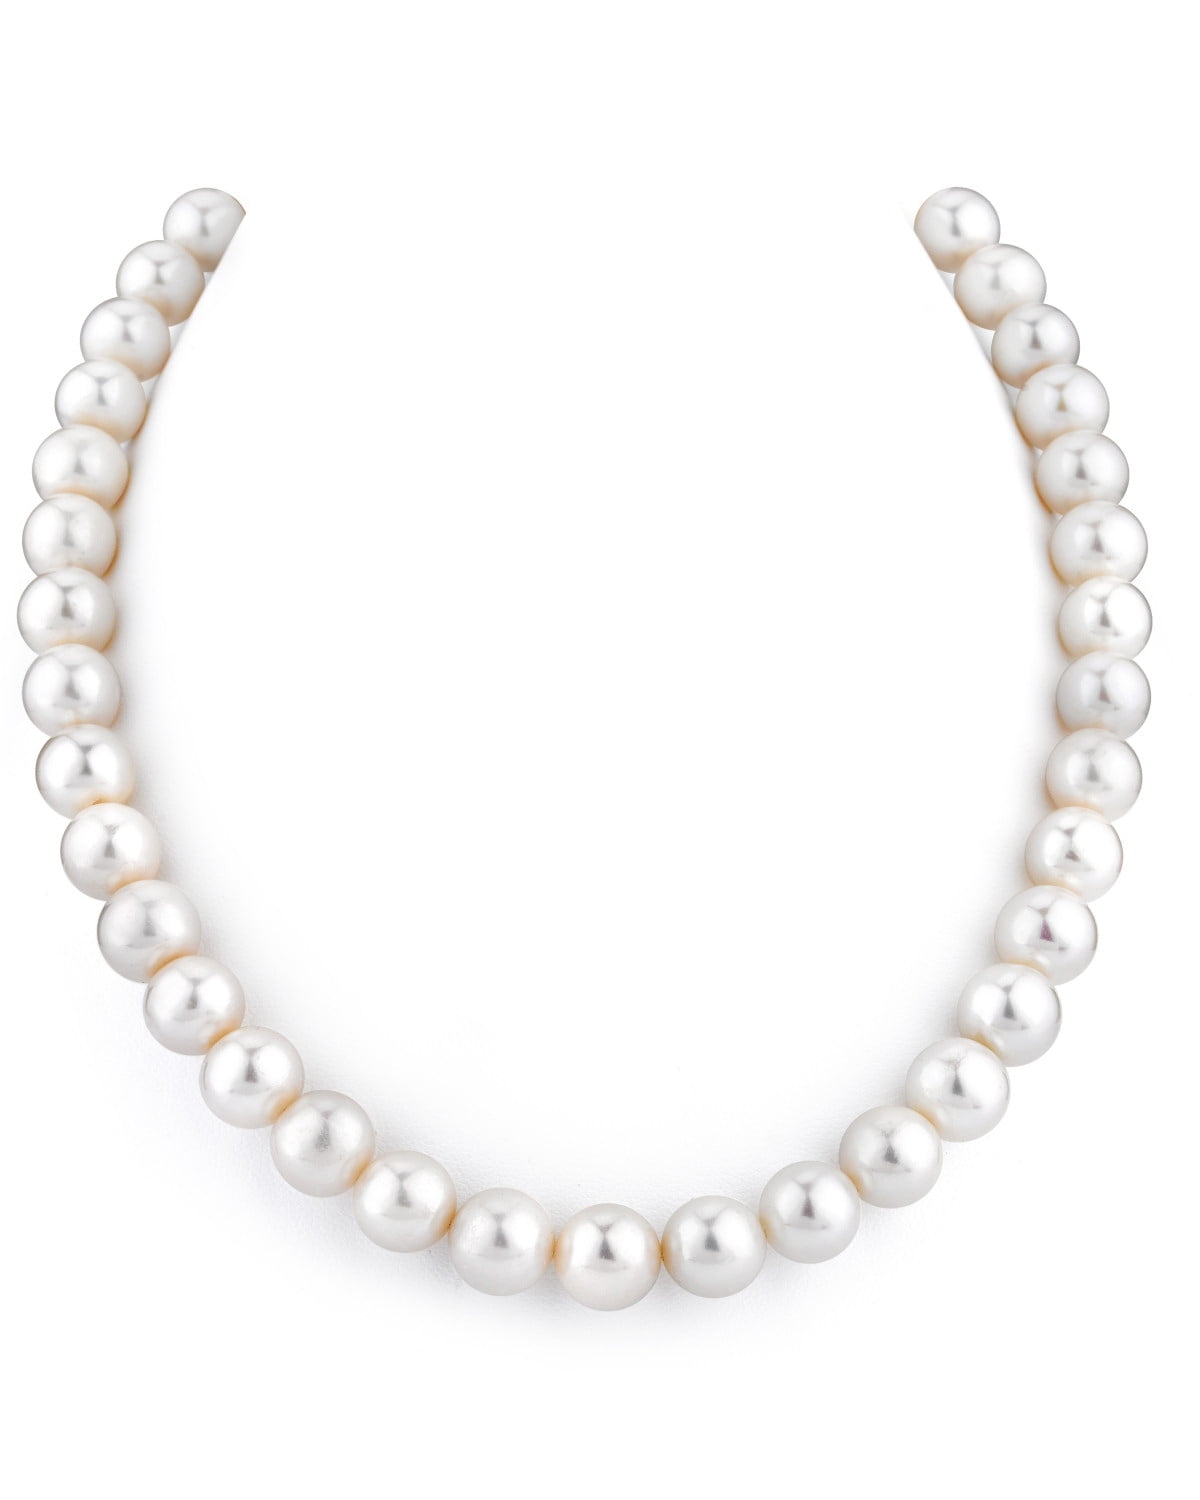 3mm white AAA akoya cultured pearl necklace 16" 18" 20" 22" 24" 14k gold clasp 